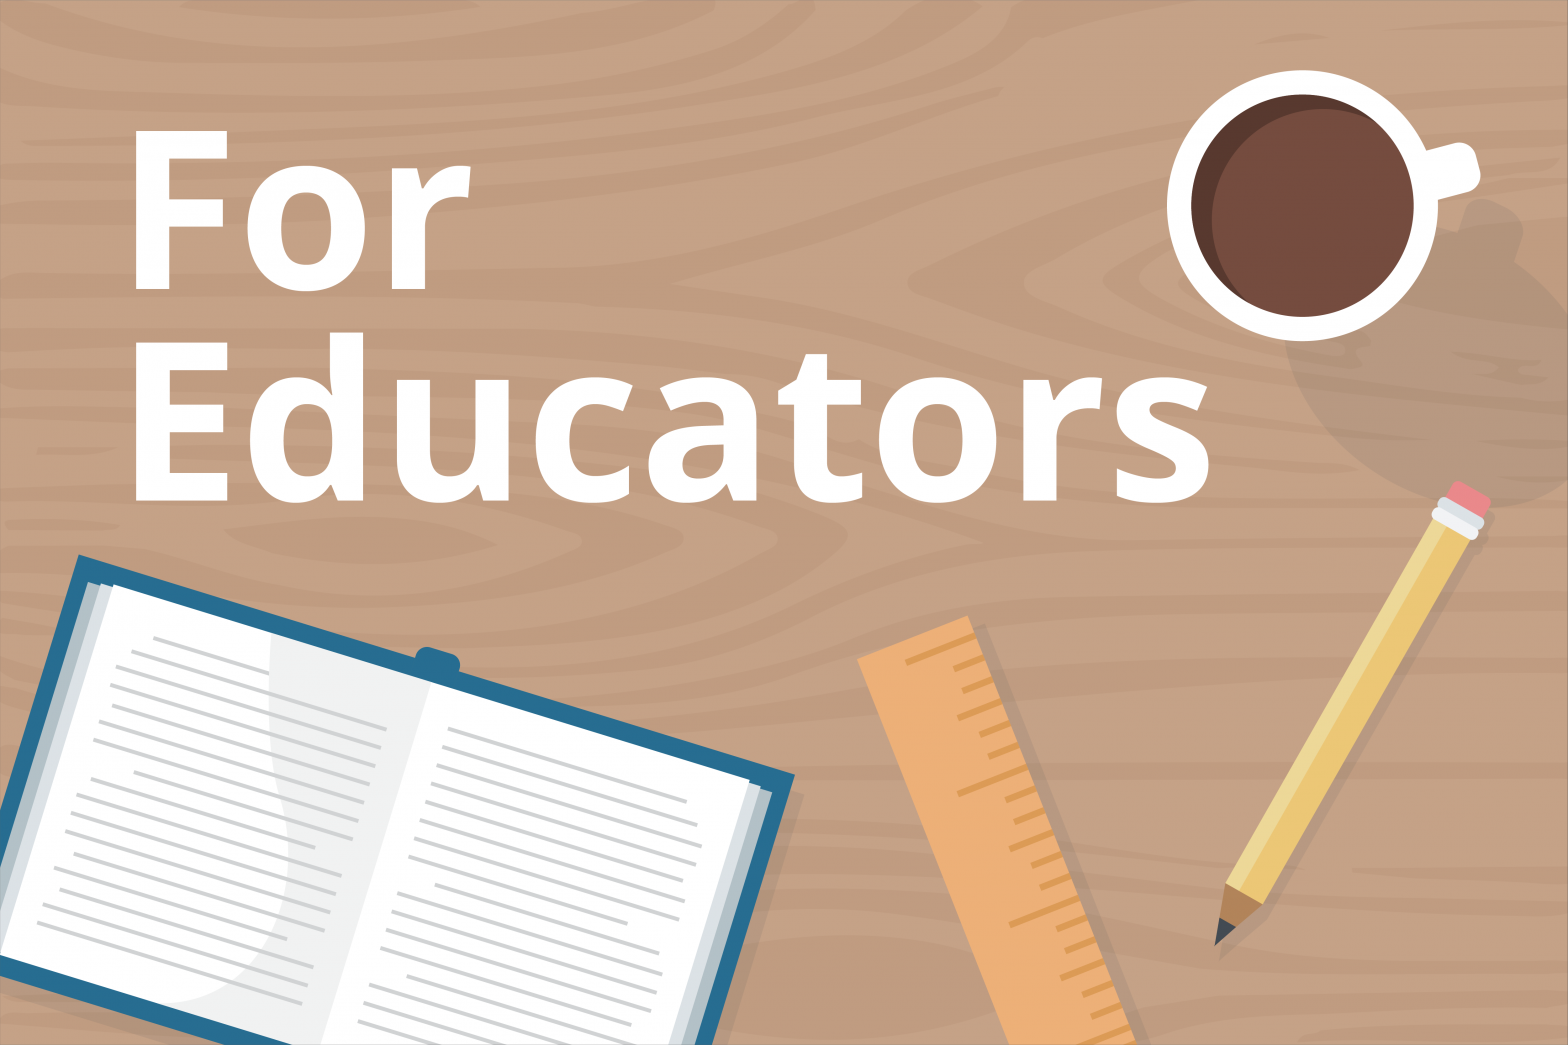 Graphic over head view of a table with a coffee cup, pencil, ruler, and open book that says "For Educators"